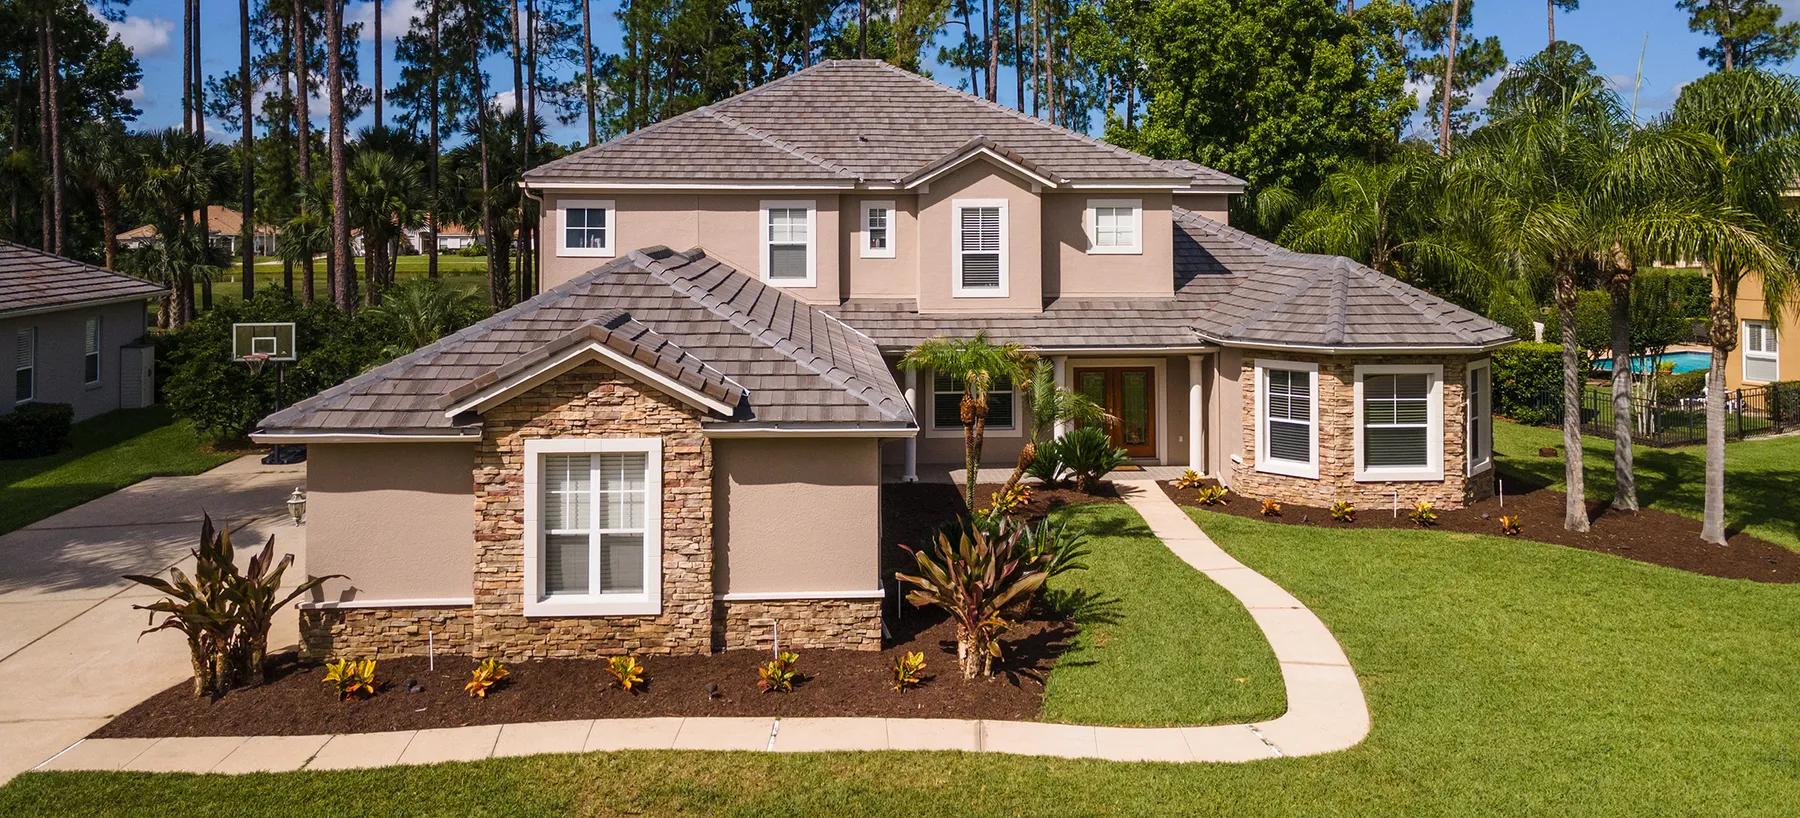 Find Luxury Real Estate in Lake Mary | Corcoran Premier Realty